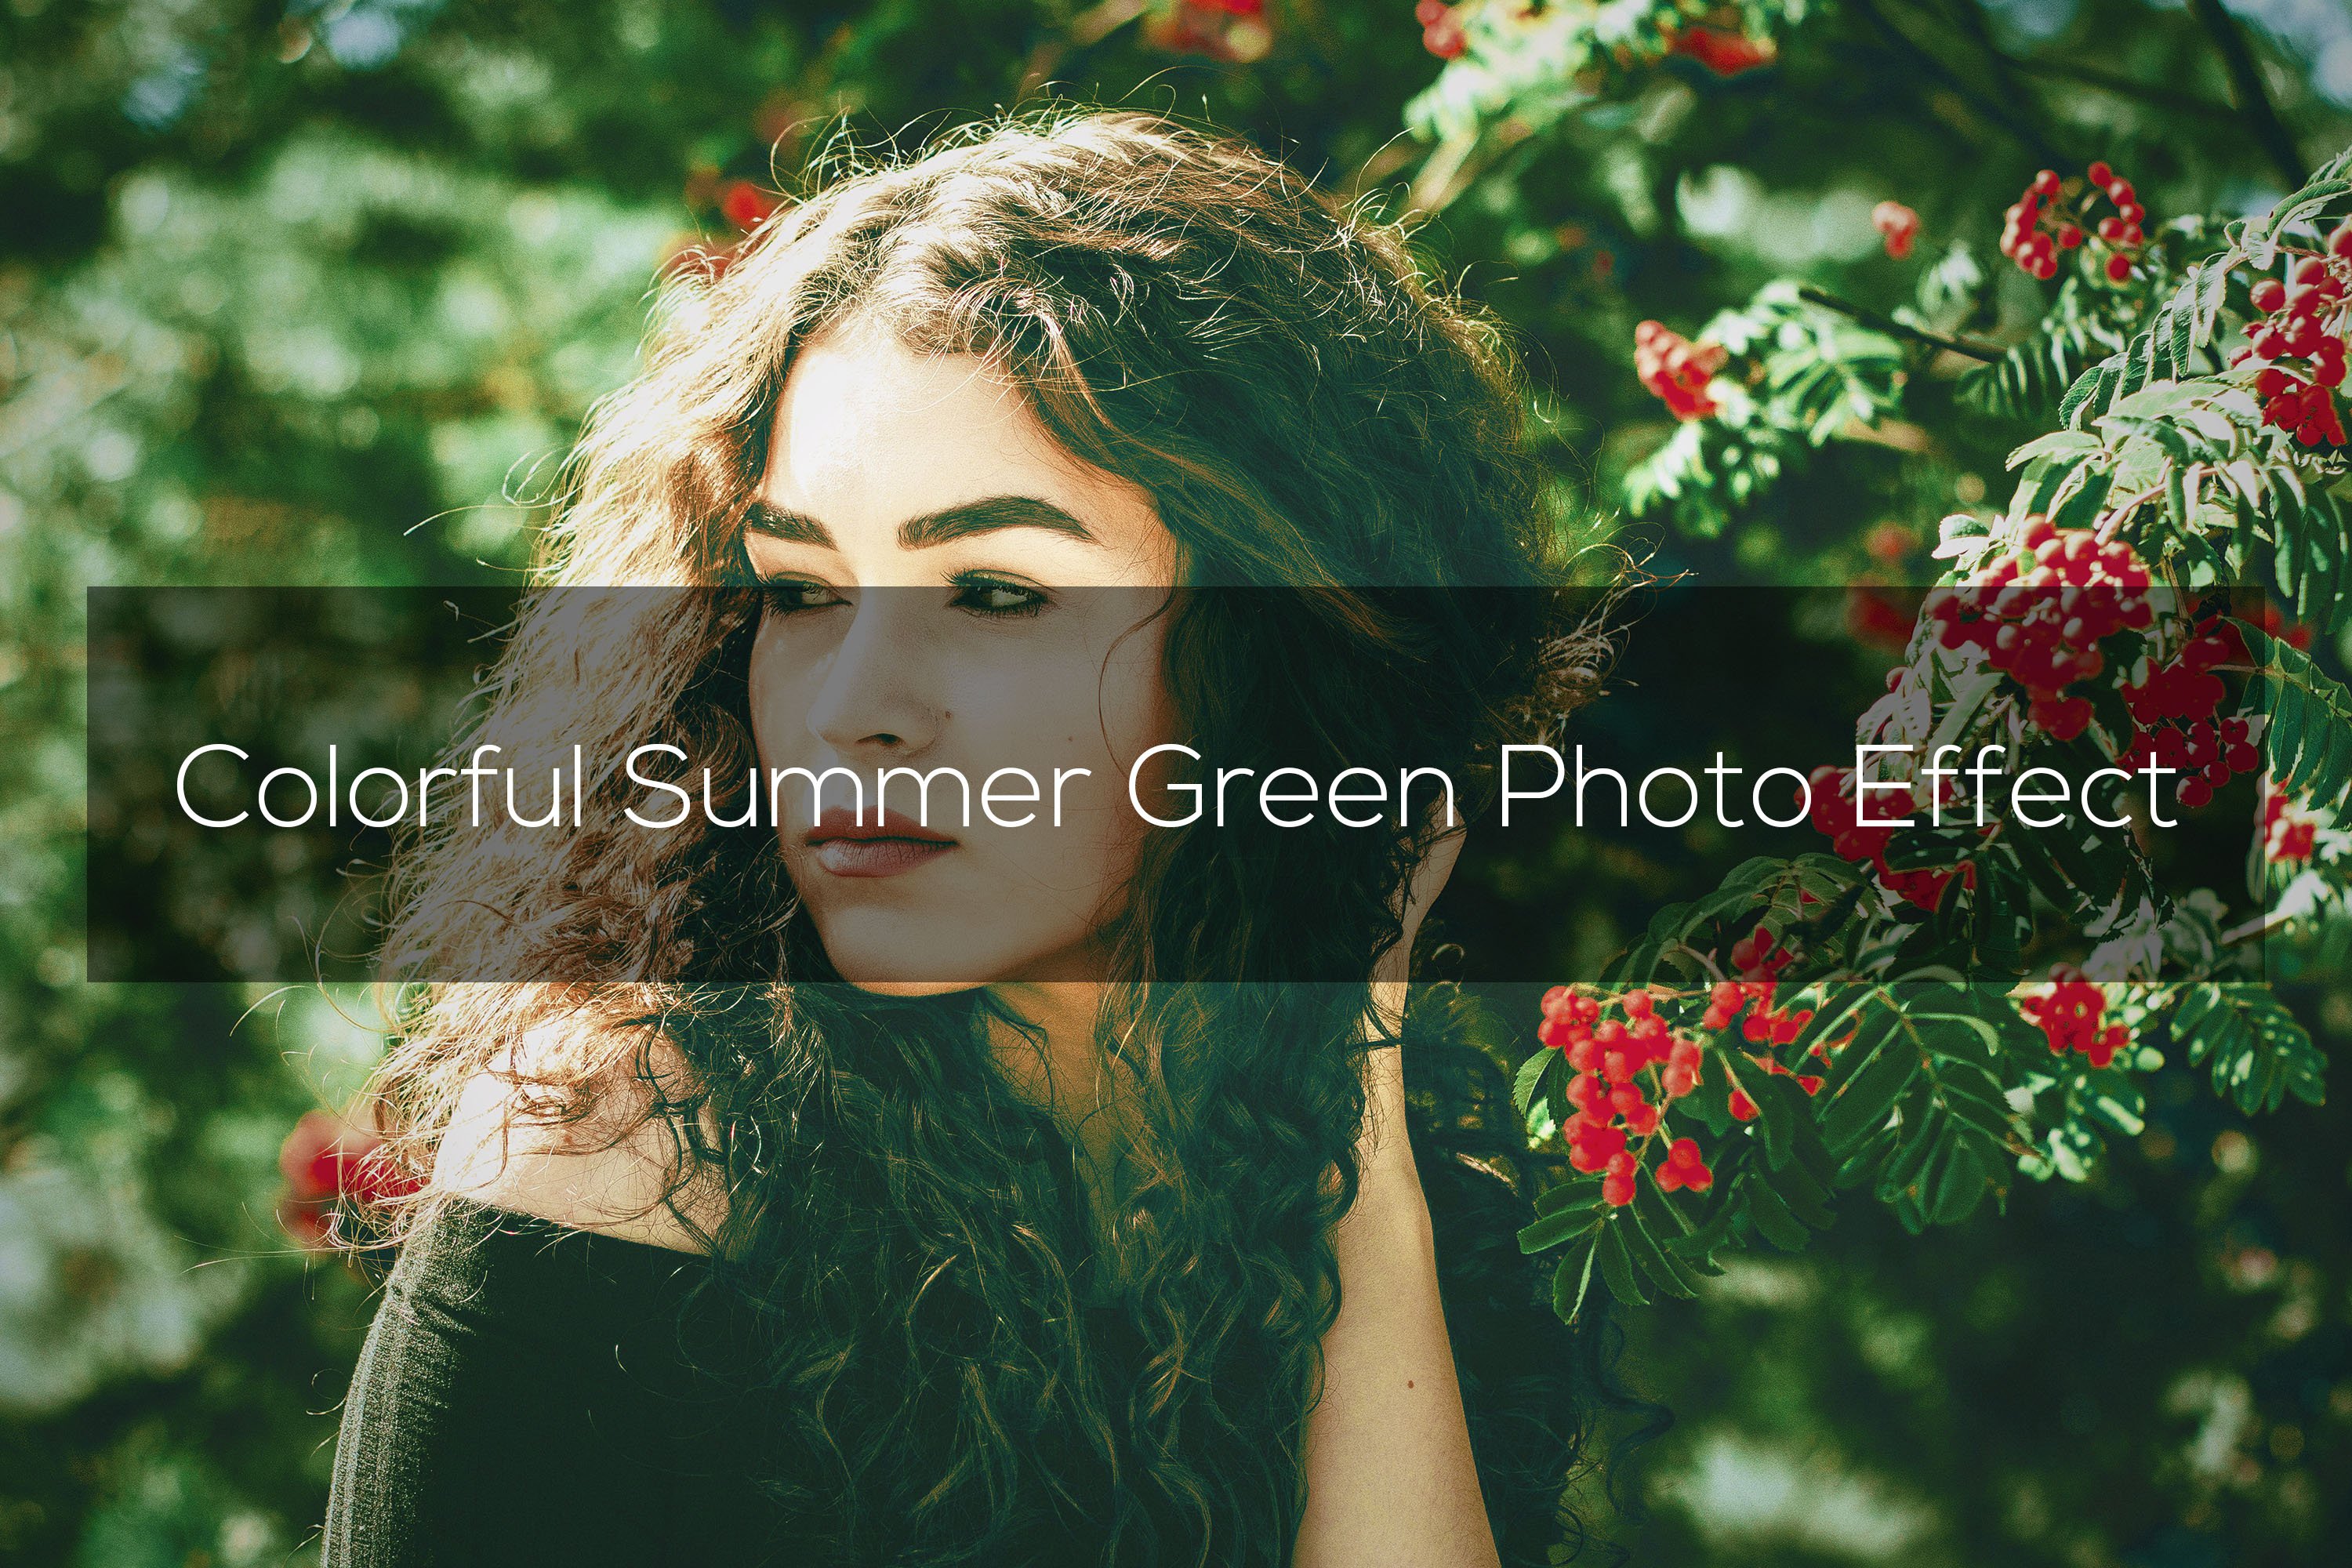 Colorful Summer Green Photo Effectcover image.